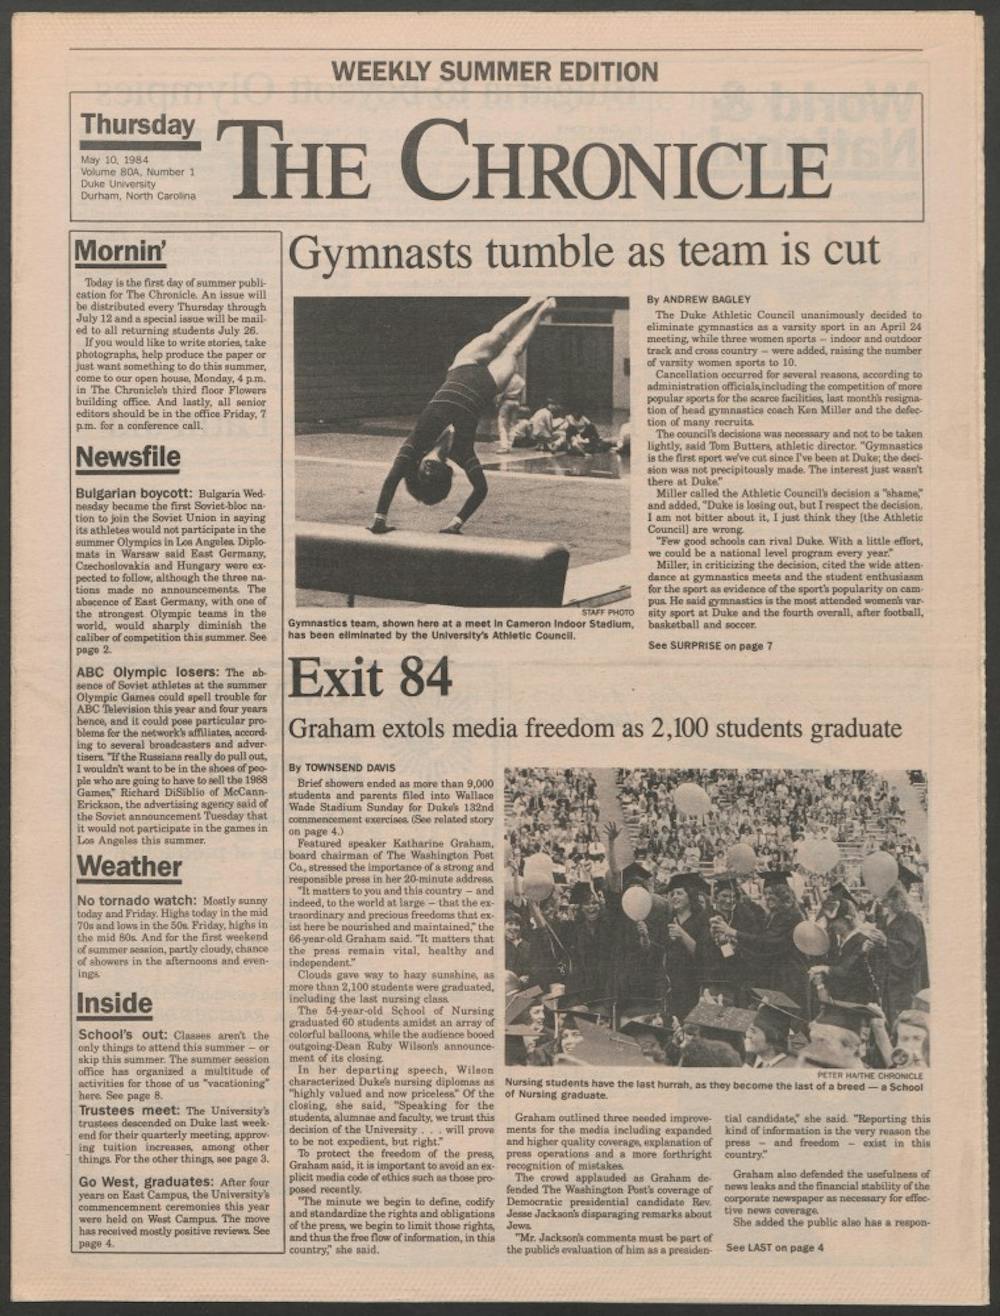 A Chronicle article in 1984 detailed Duke’s decision to cut gymnastics as a sport.